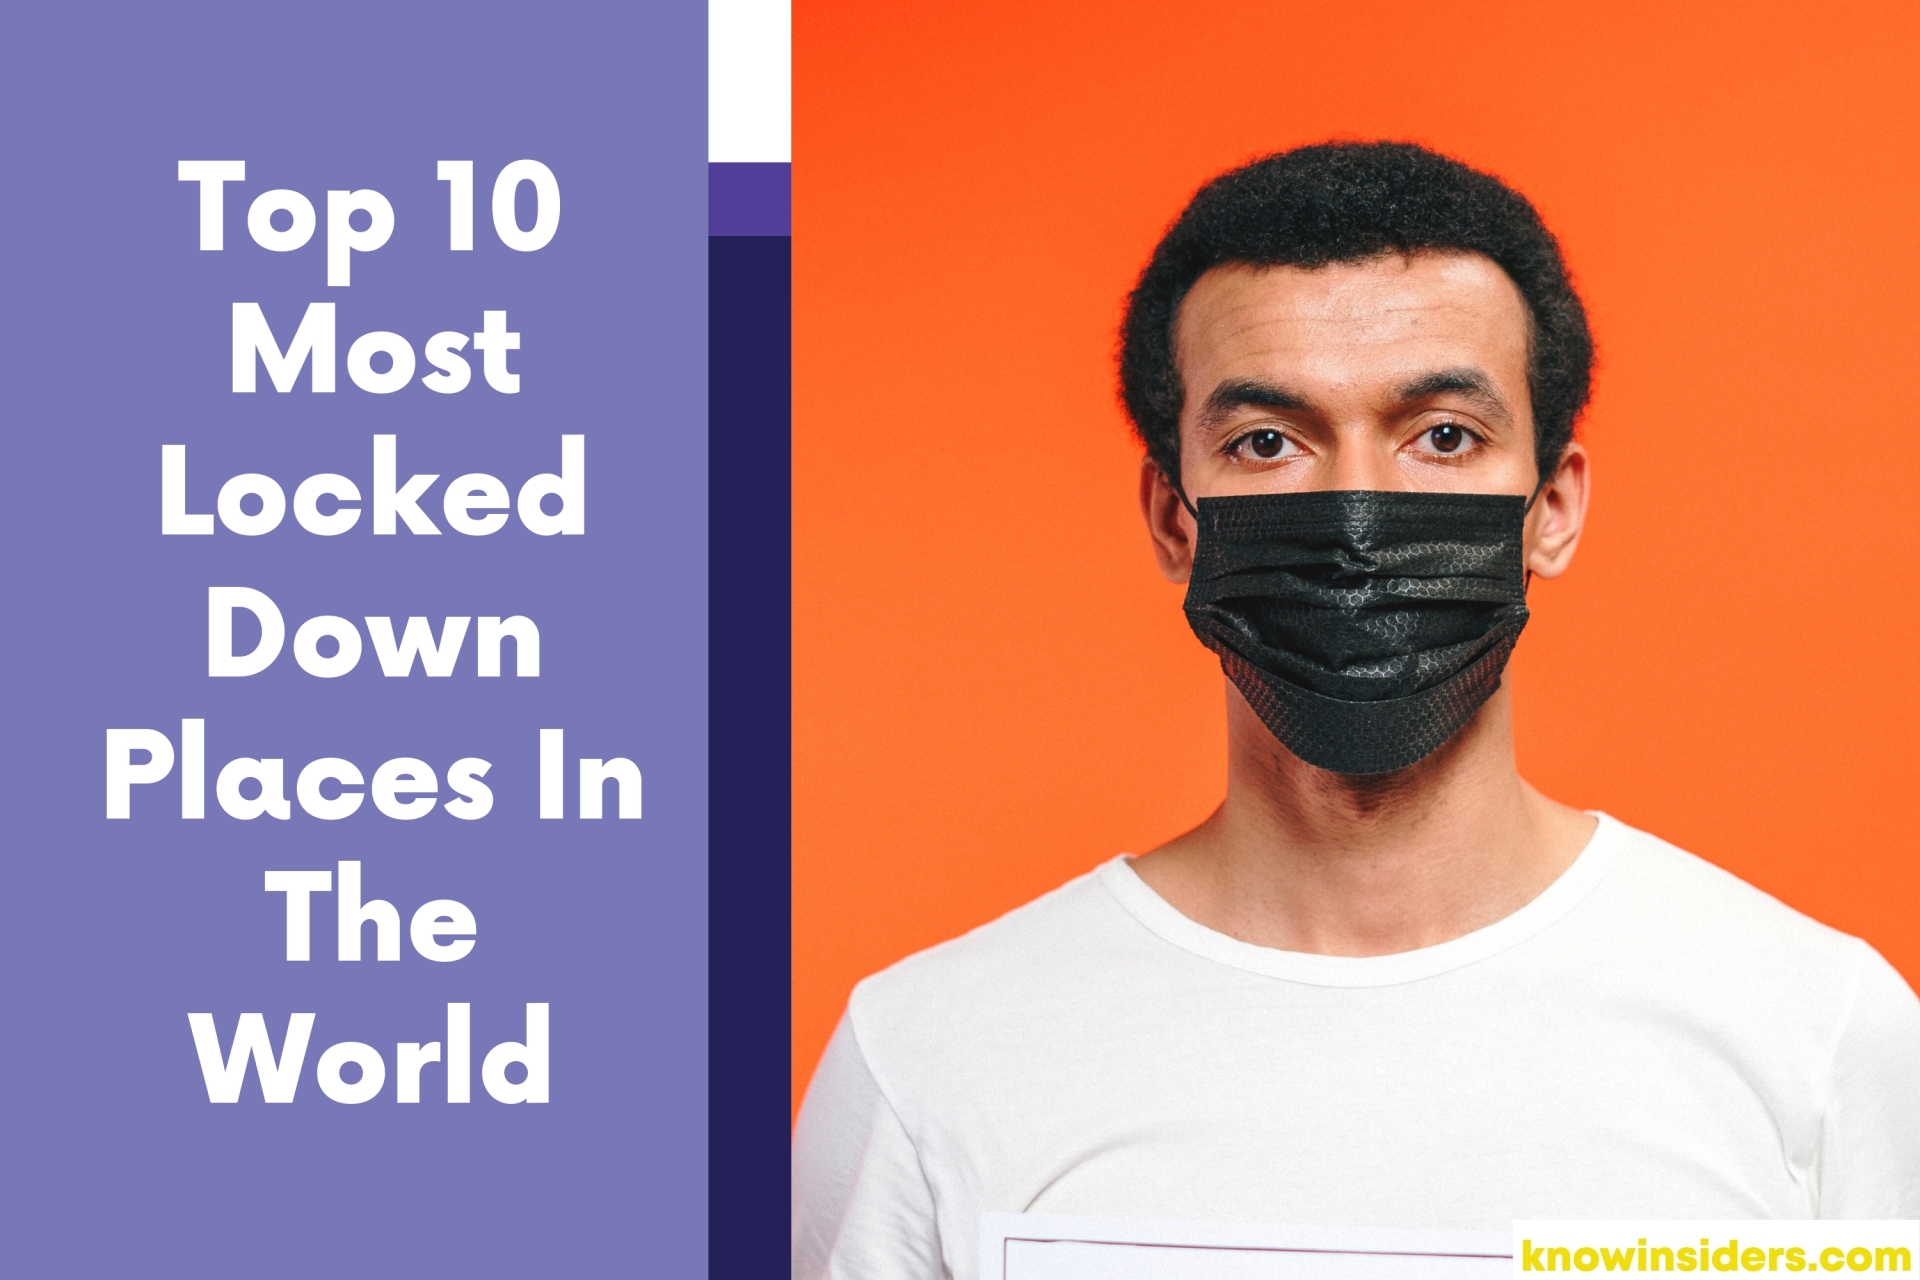 Top 10 Most Locked Down Places In The World - During Covid-19 Pandemic